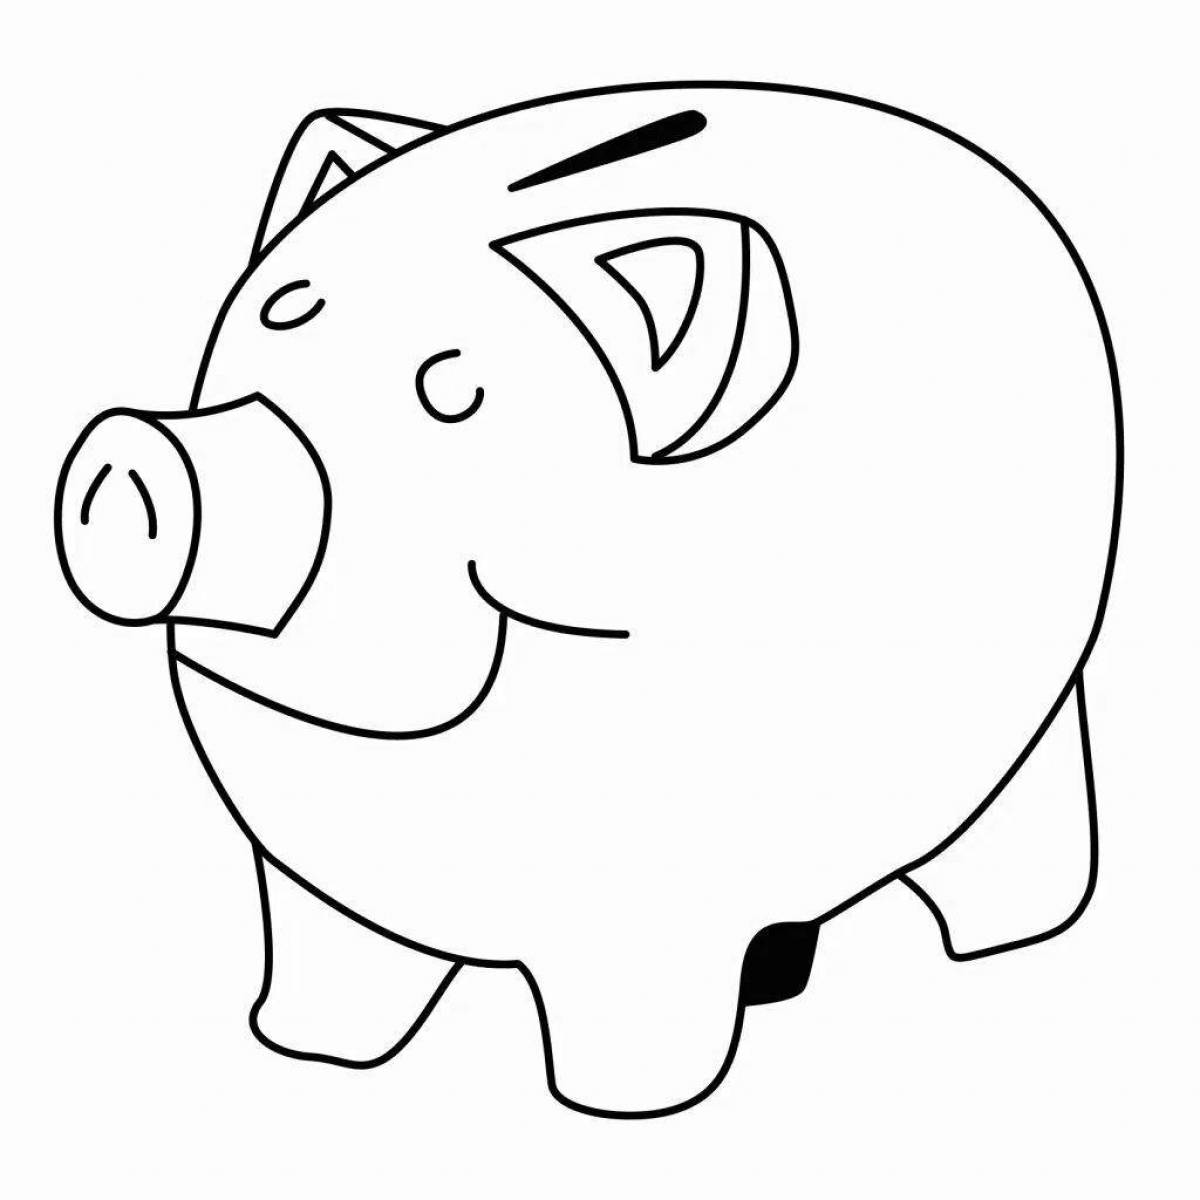 Colorful piggy bank coloring book for kids